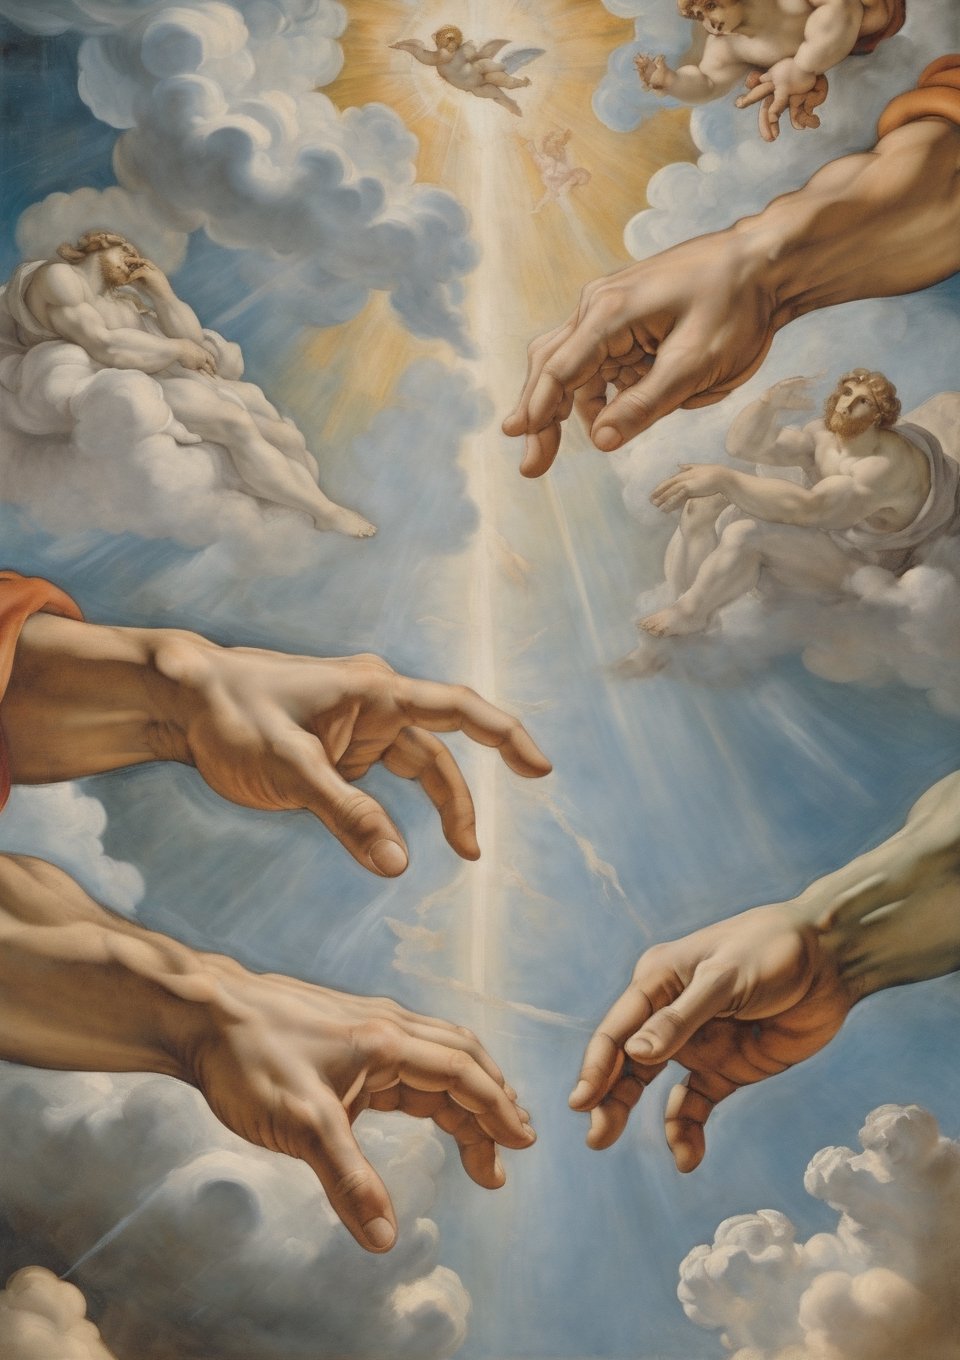 imagine two hands touching their fingers, one hand reaching down from clouds above, the other hand reaching up from below,  michelangelo painting, the creation of adam, artstyle by Michelangelo Buonarroti, christian art, renaissance religious art, michelangelo style, celestial, billowing clouds  ,detailmaster2 ,art by sargent 